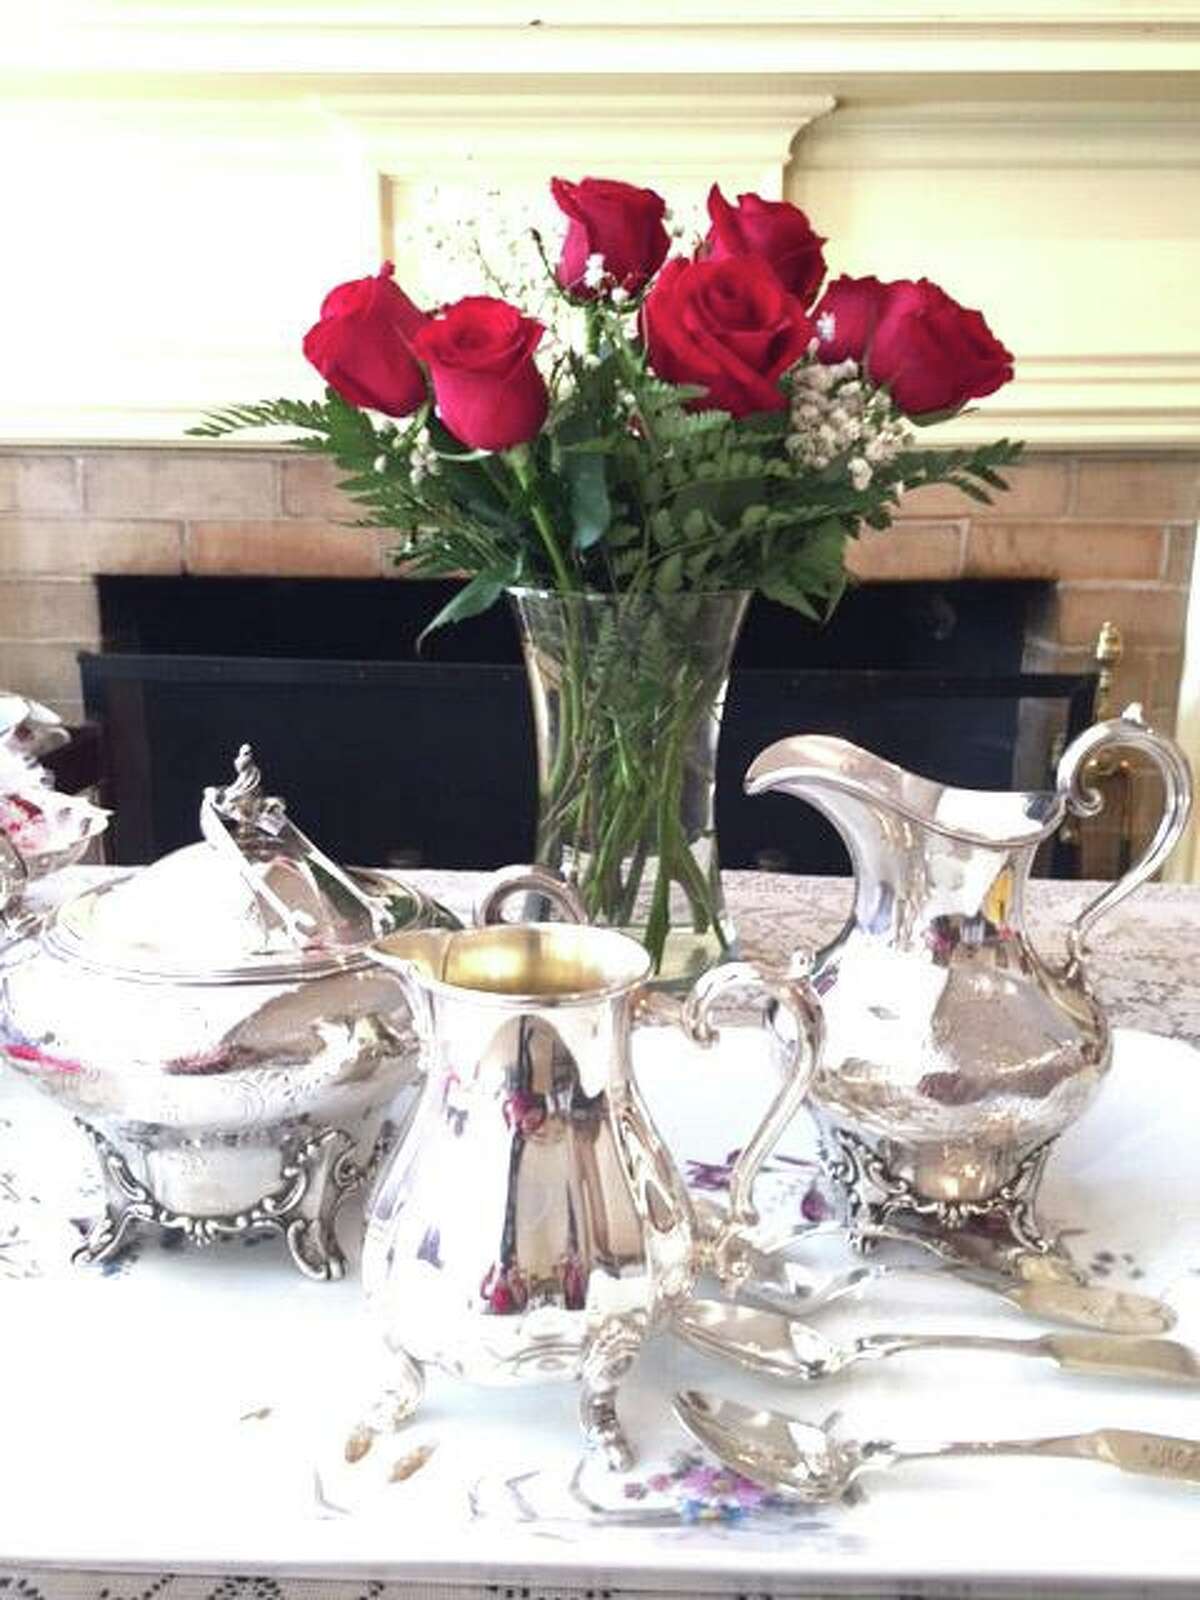 The New Canaan Museum and Historical Society’s annual Valentine’s Tea was held on Friday, February 14, 2020, at 1 p.m.